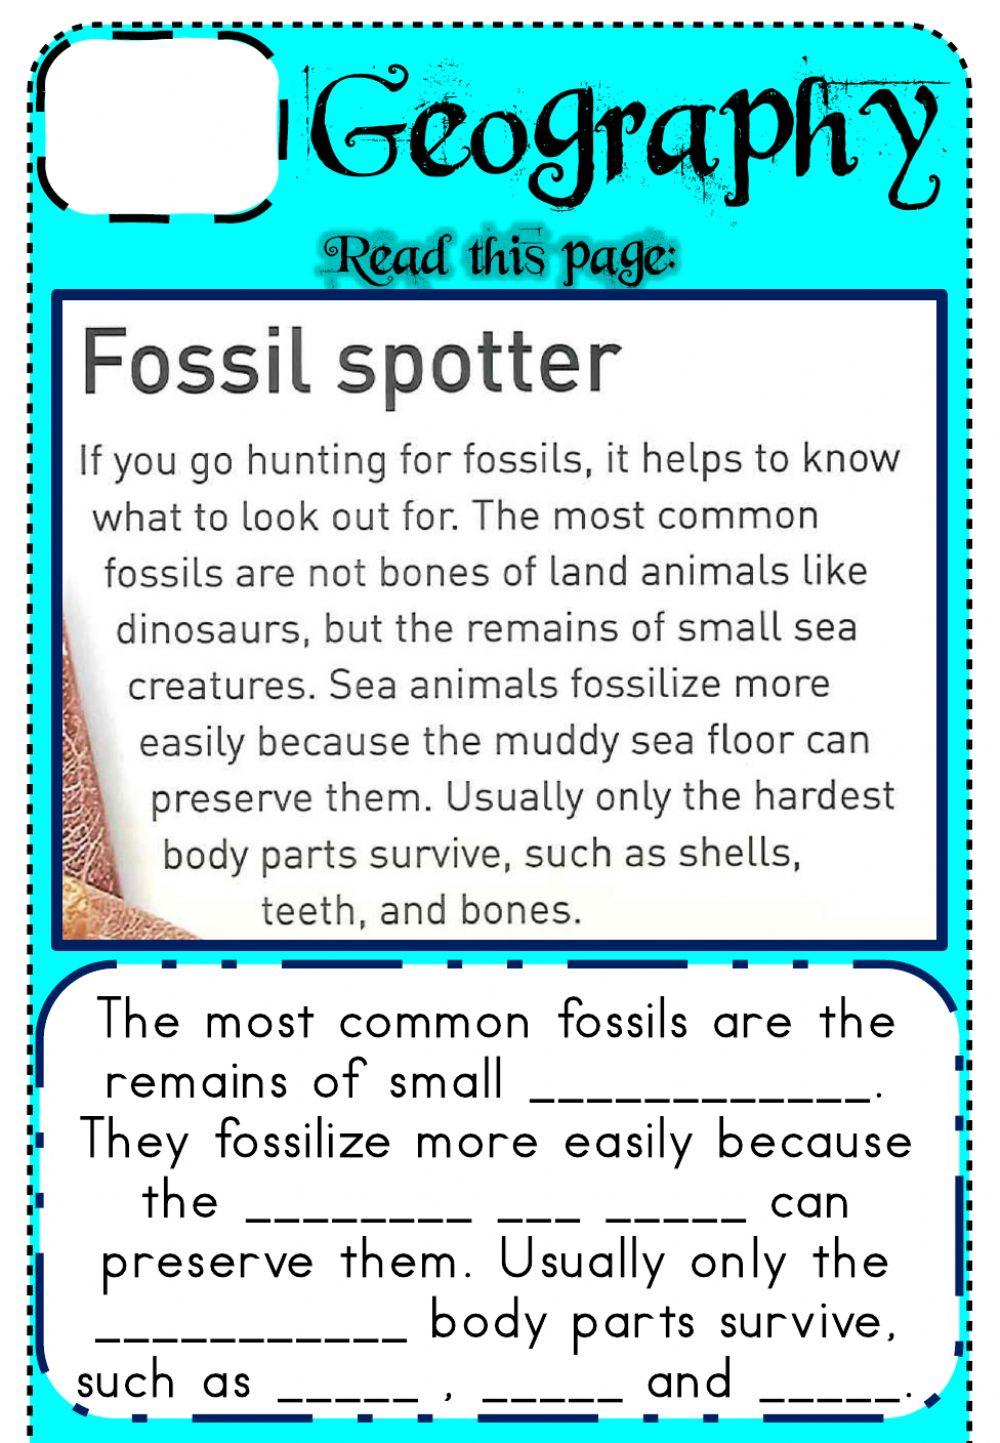 Week 25 - Geography - Fossils